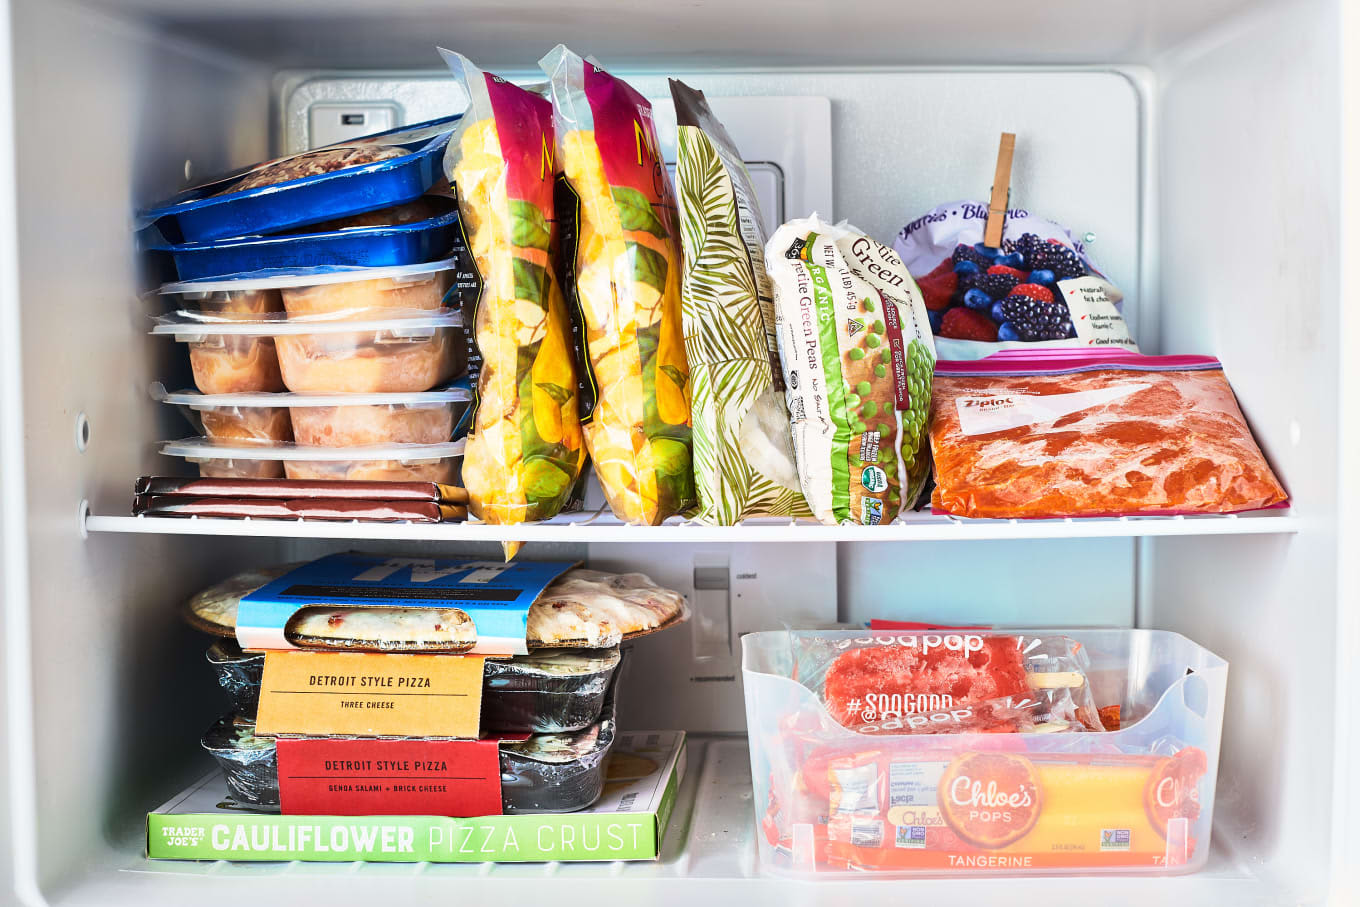 How safe is the food in YOUR freezer?